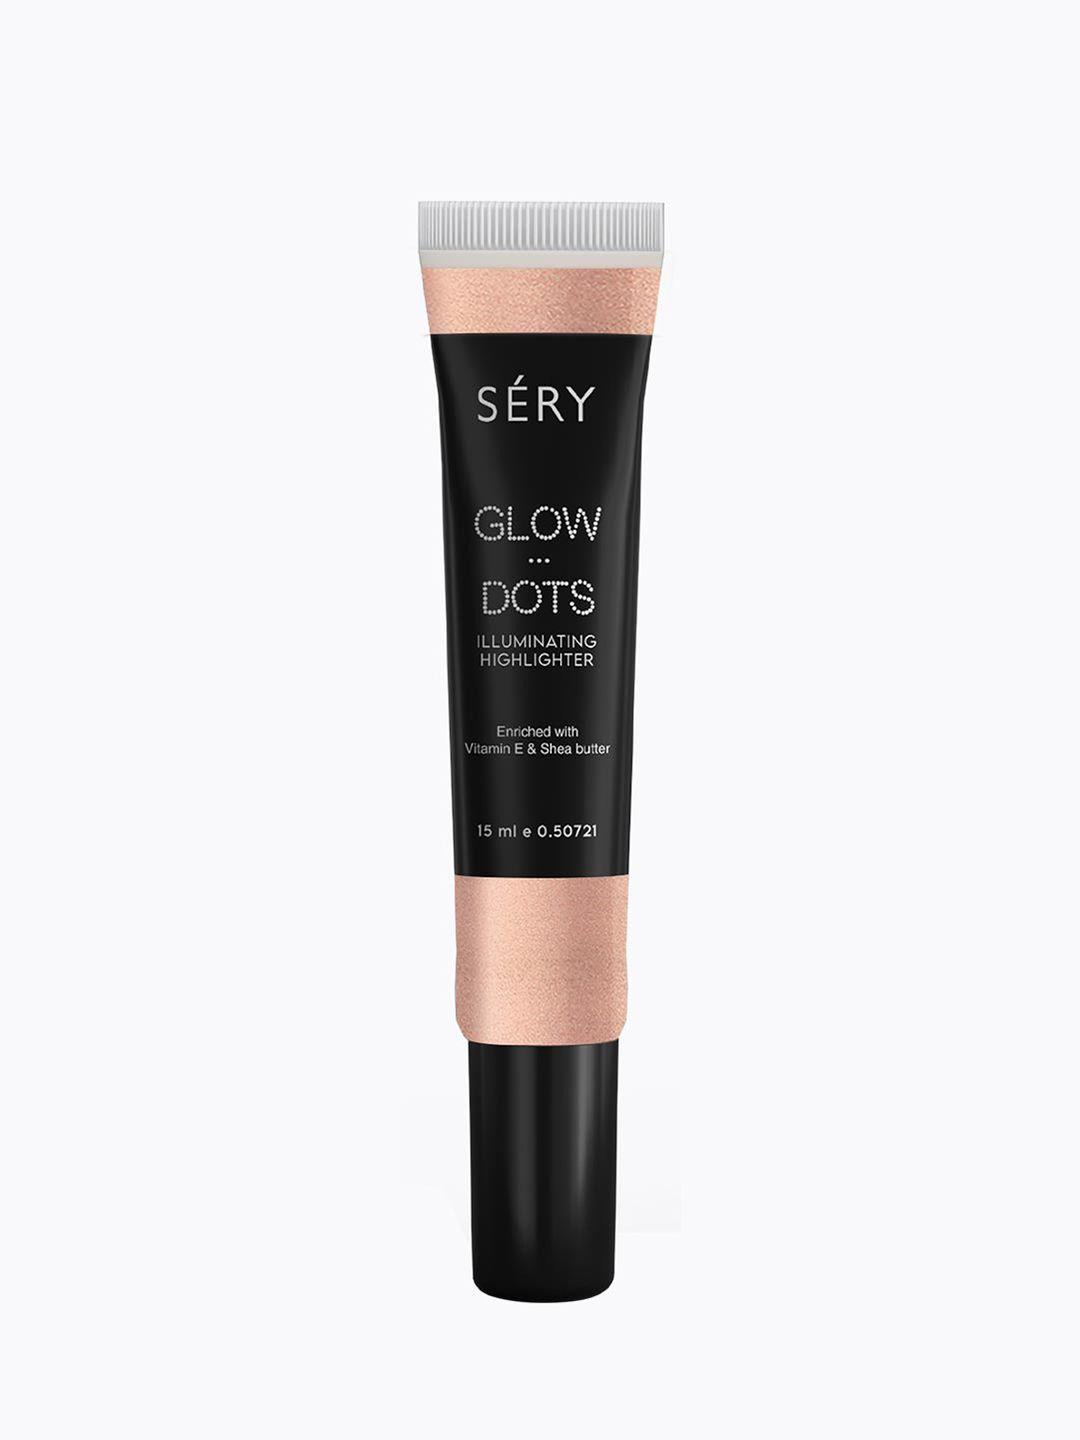 sery glow dots smudge-proof illuminating highlighter with vitamin e 15ml - rose